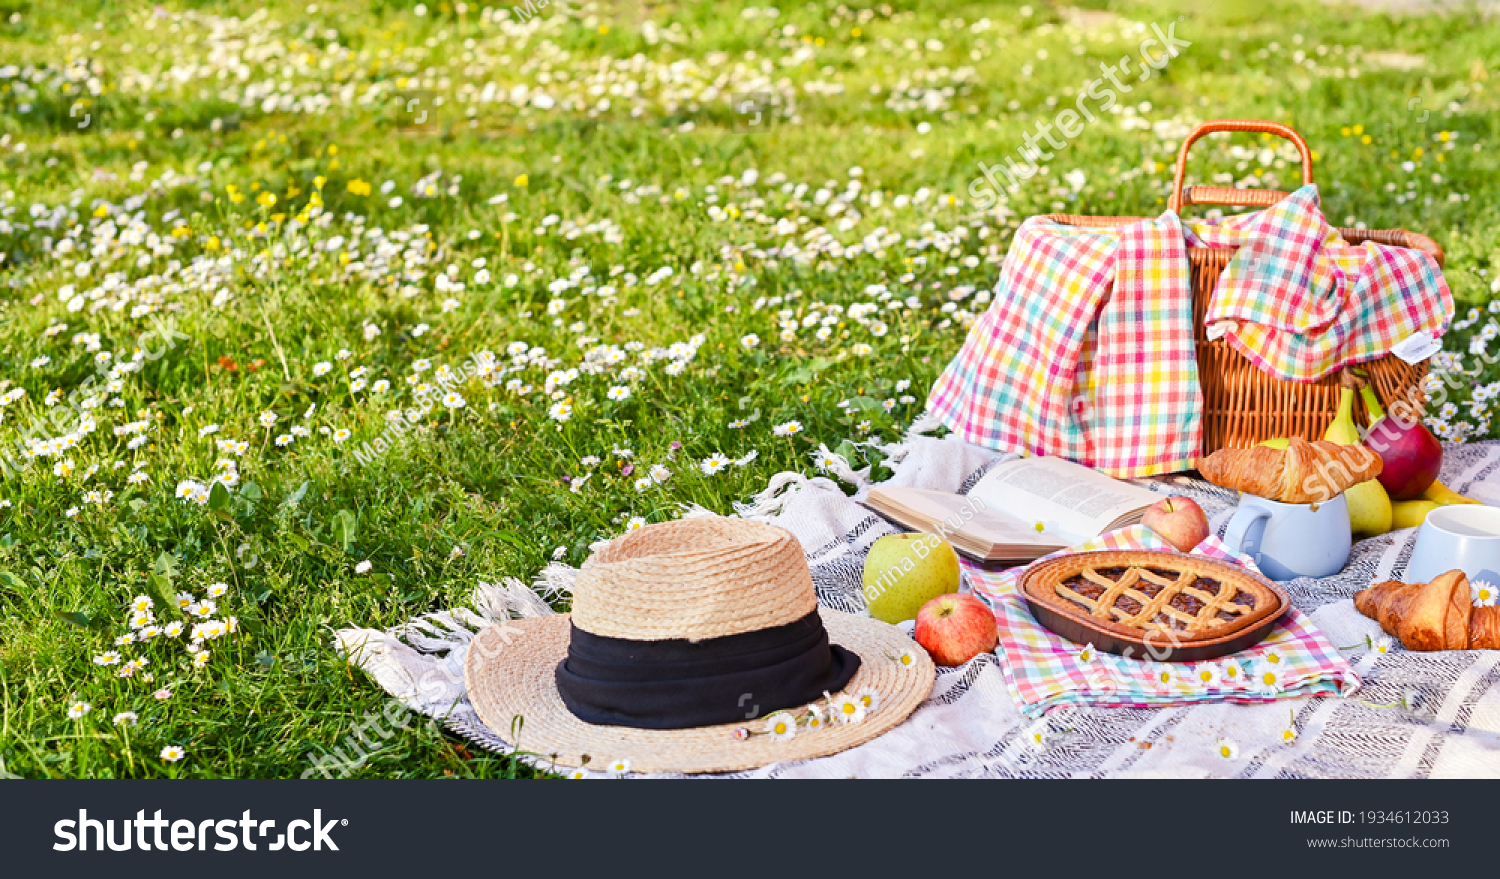 Picnic basket on the green grass in the park. Delicious food for lunch outdoors. Sweet pastries, drinks and fruits. Nice day in summer. High quality photo. Copy space #1934612033